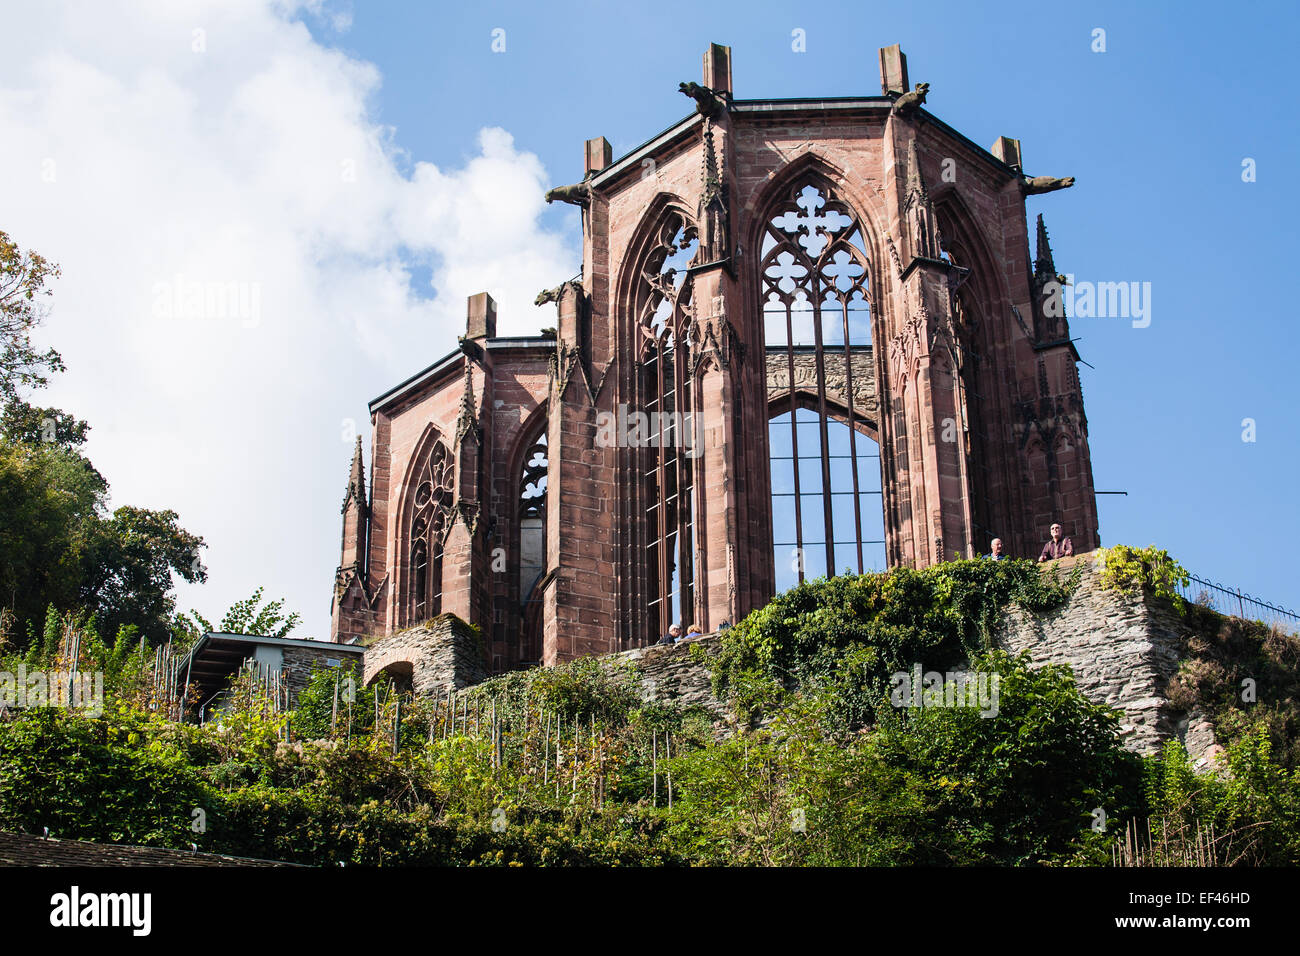 Werner Chapel, Bacharach, Germany Stock Photo